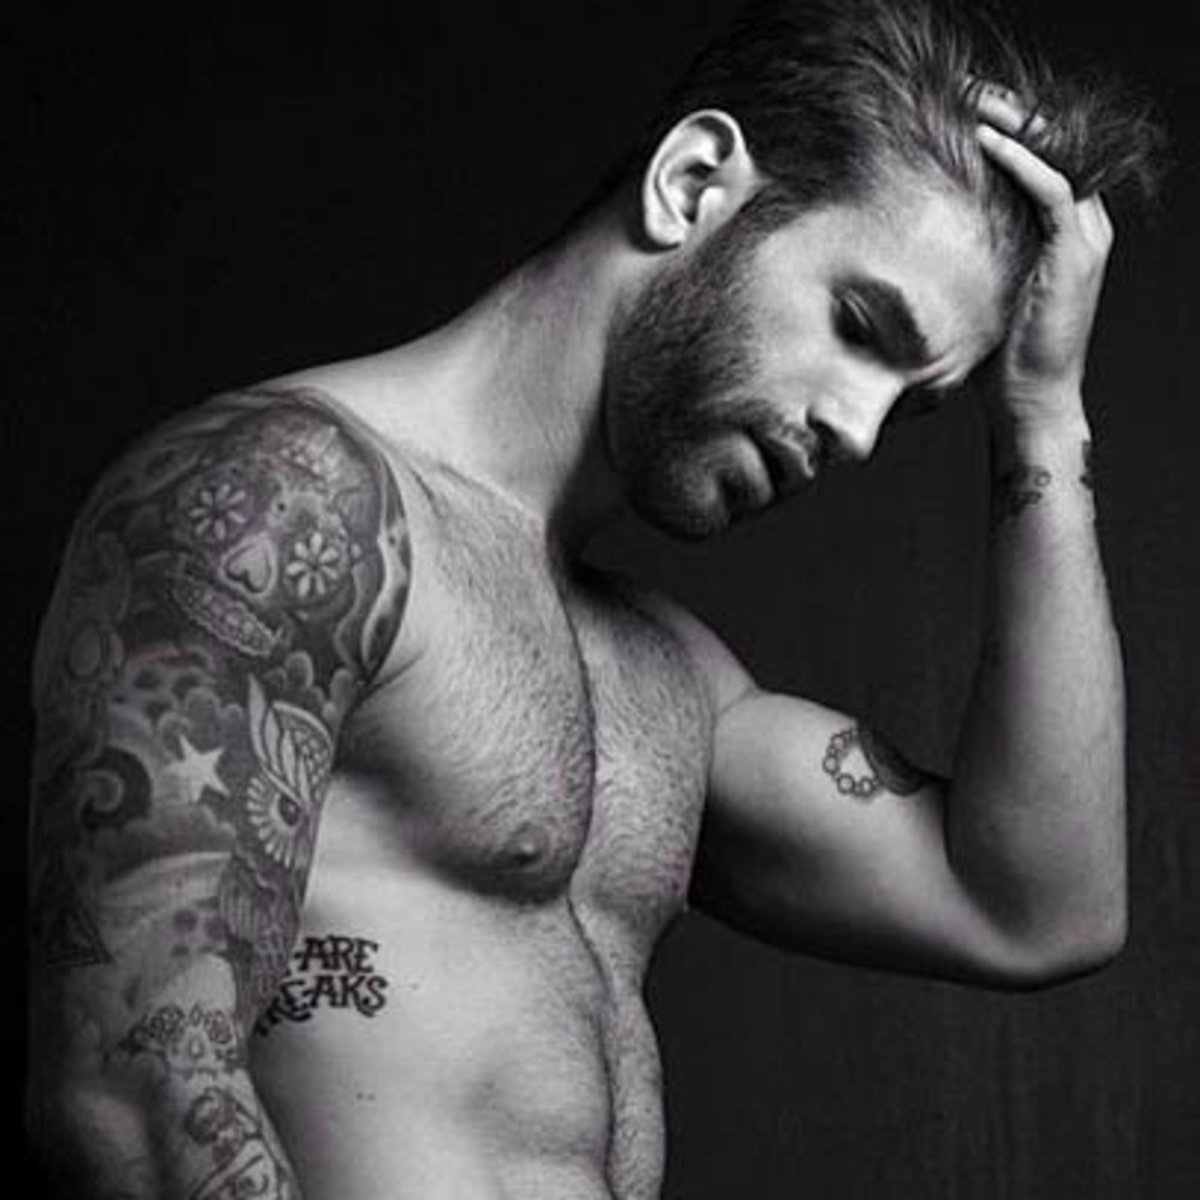 List of 8 Male Models With Tattoos and Their Pictures